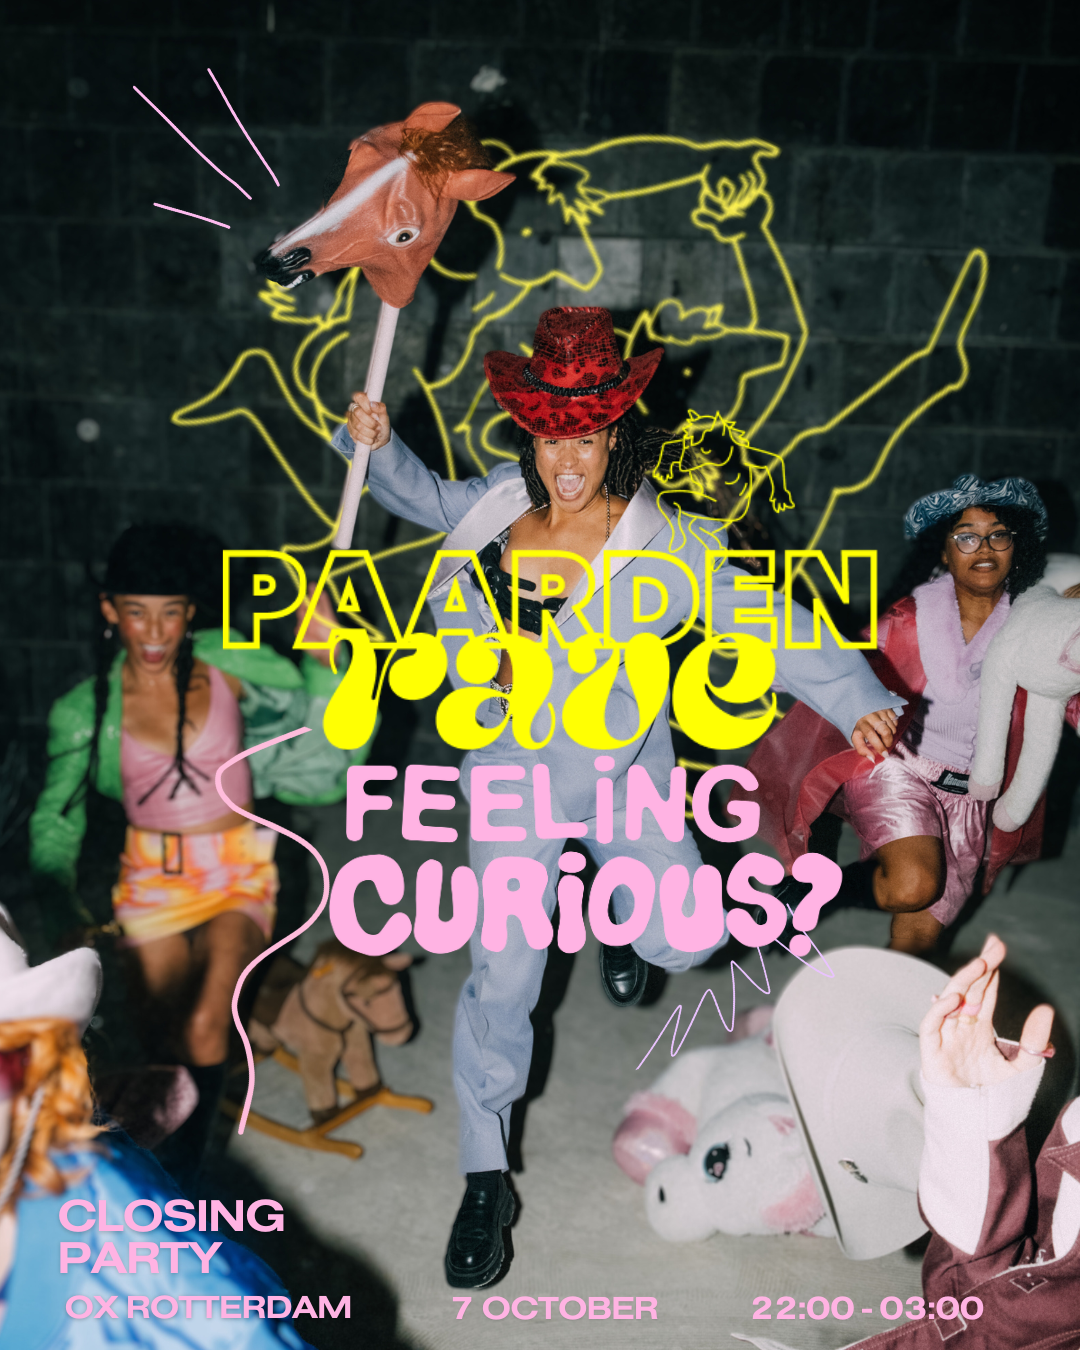 Closing Party - Feeling Curious? x Paardenrave - フライヤー表